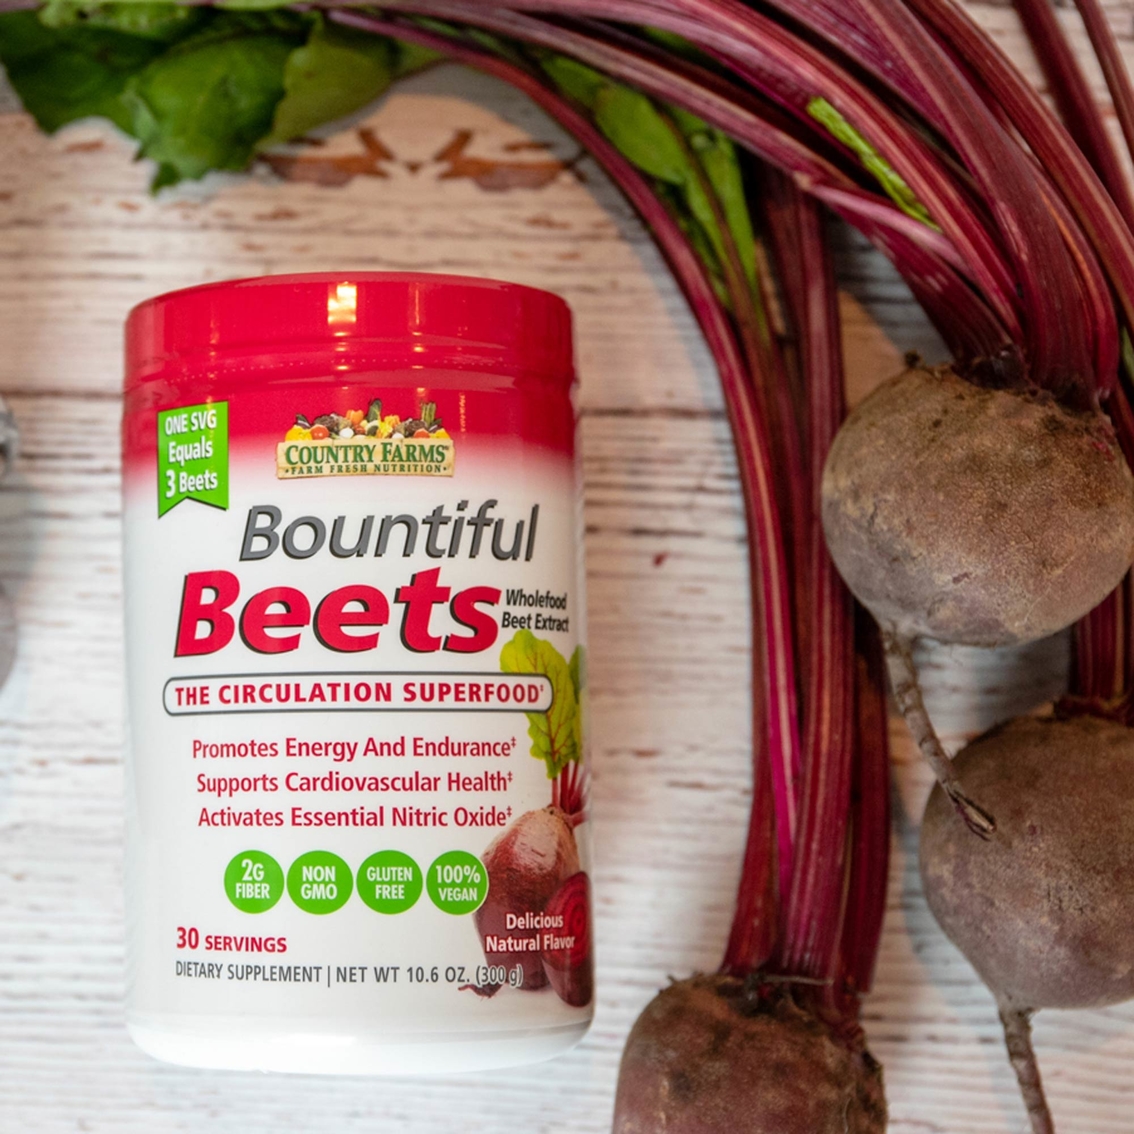 Country Farms Bountiful Beets 10.6 oz. - Image 6 of 7